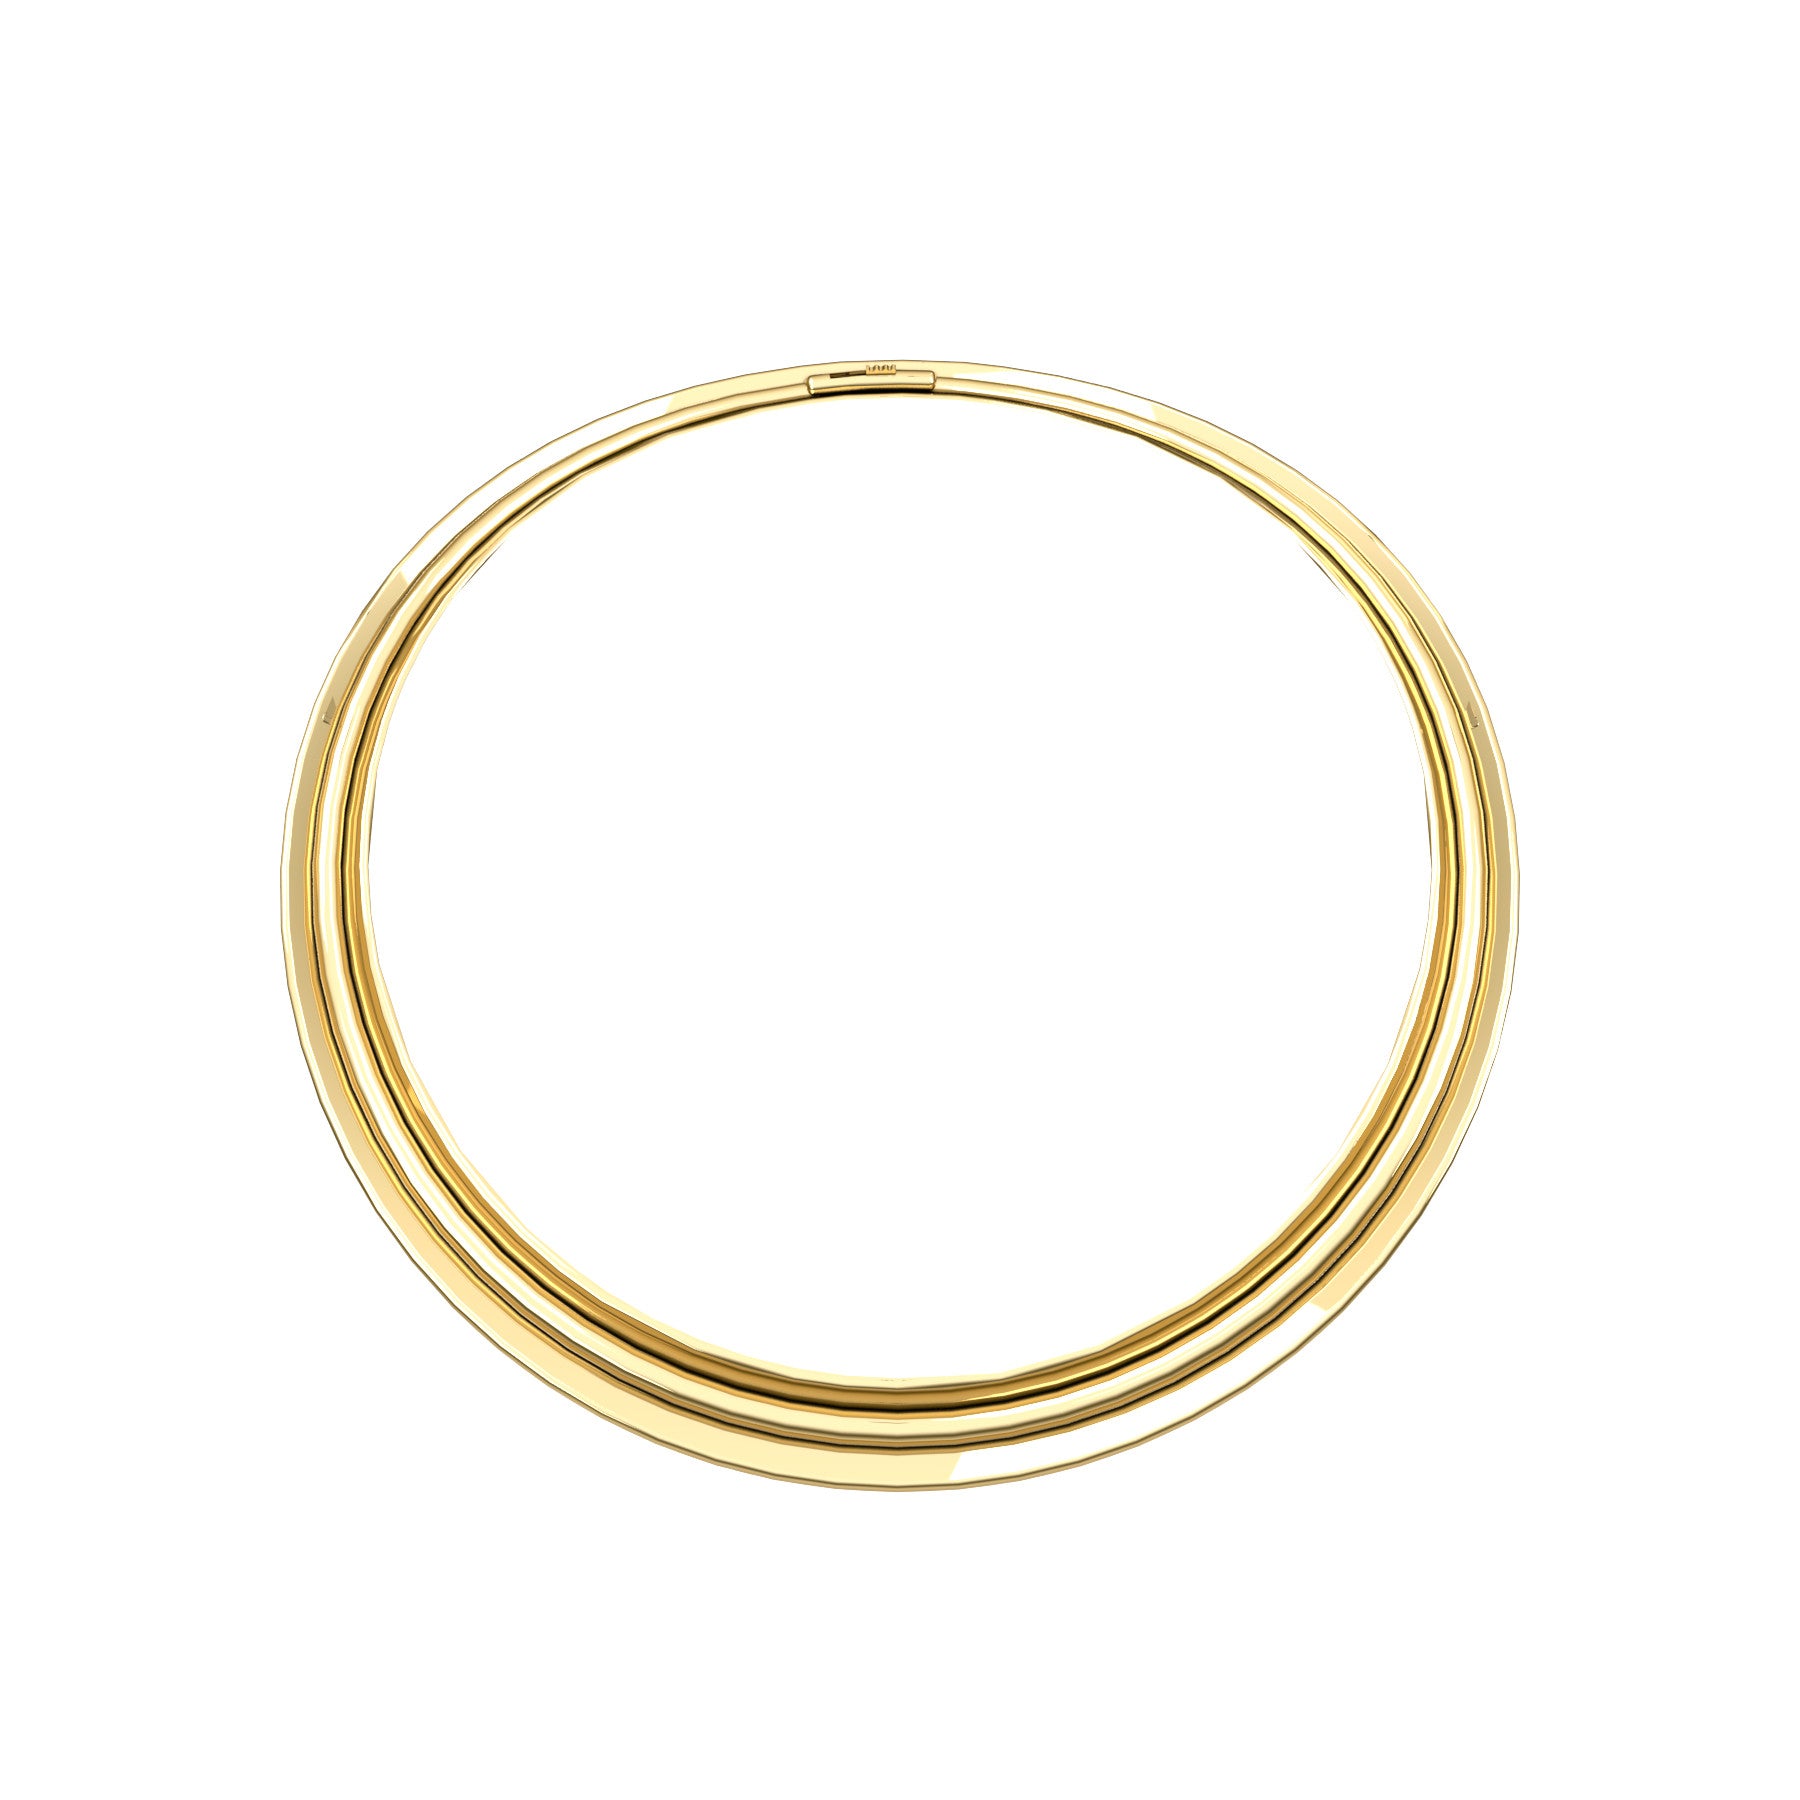 bobo rigid necklace, 18 K yellow gold, weight about 88 to 96 g. (3.03 to 3.38 oz) width 13,7 mm max